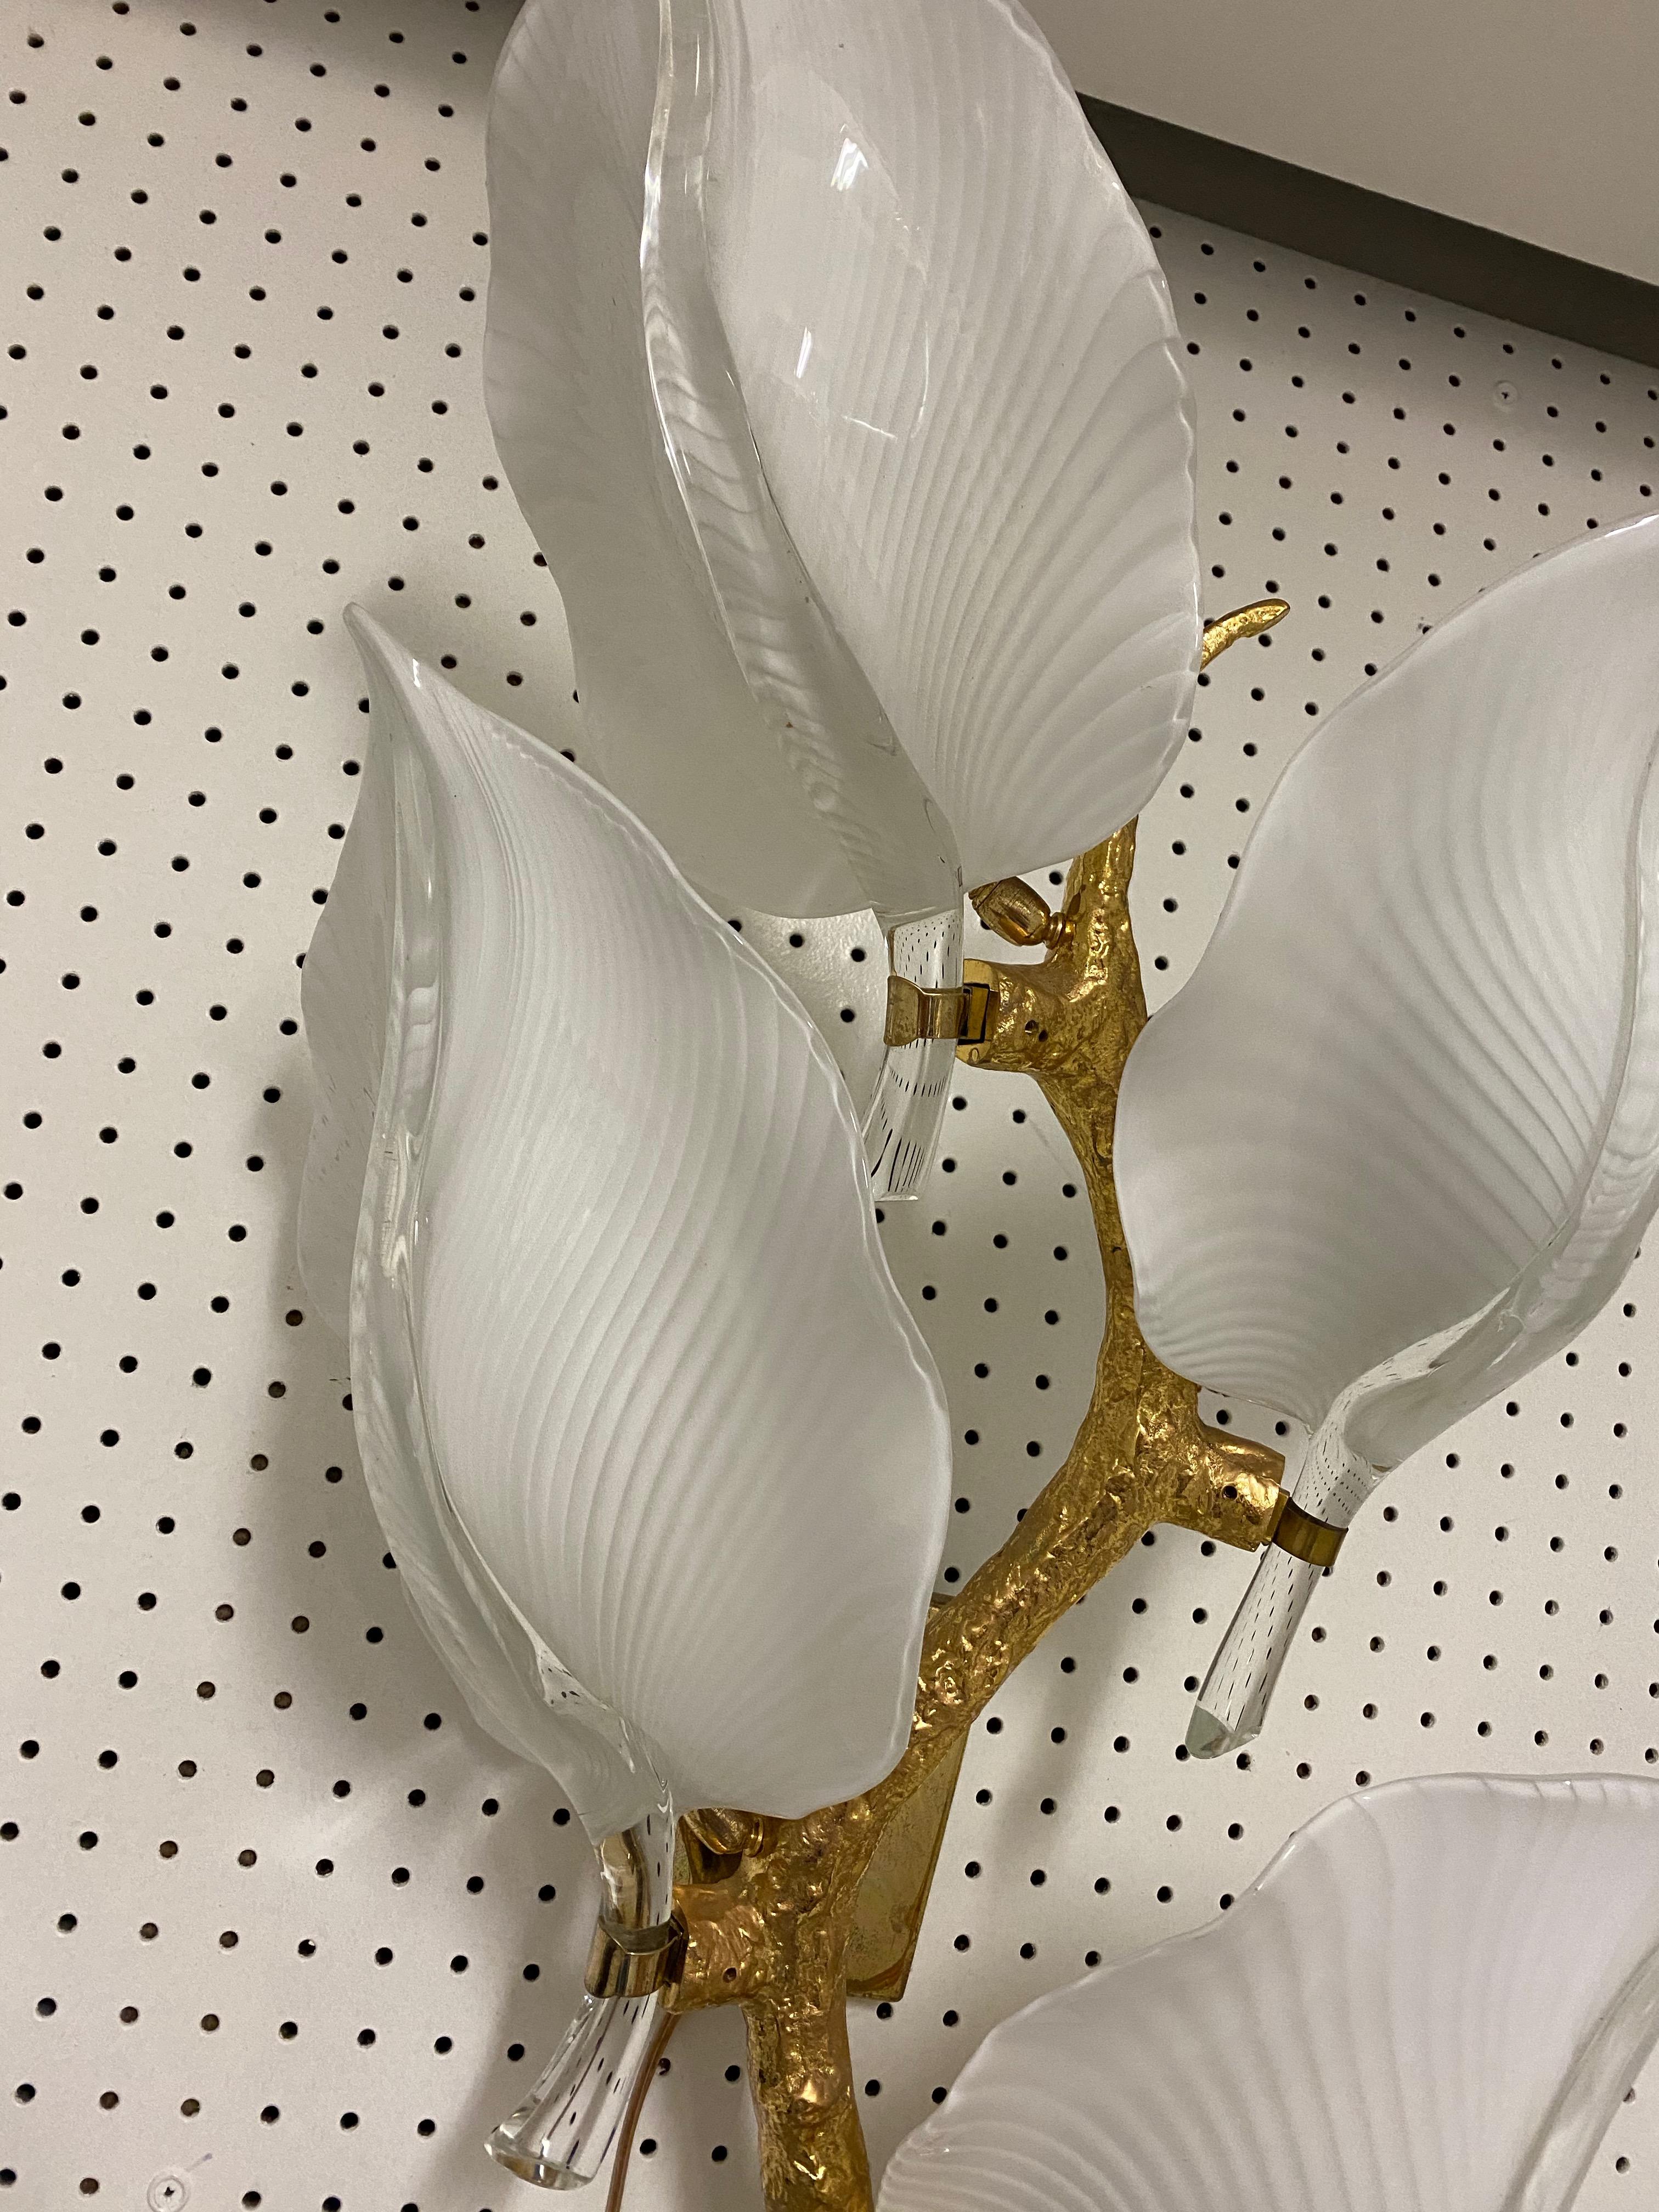 Mid-20th Century Italian Midcentury Murano Glass Sconce by Franco Luce For Sale